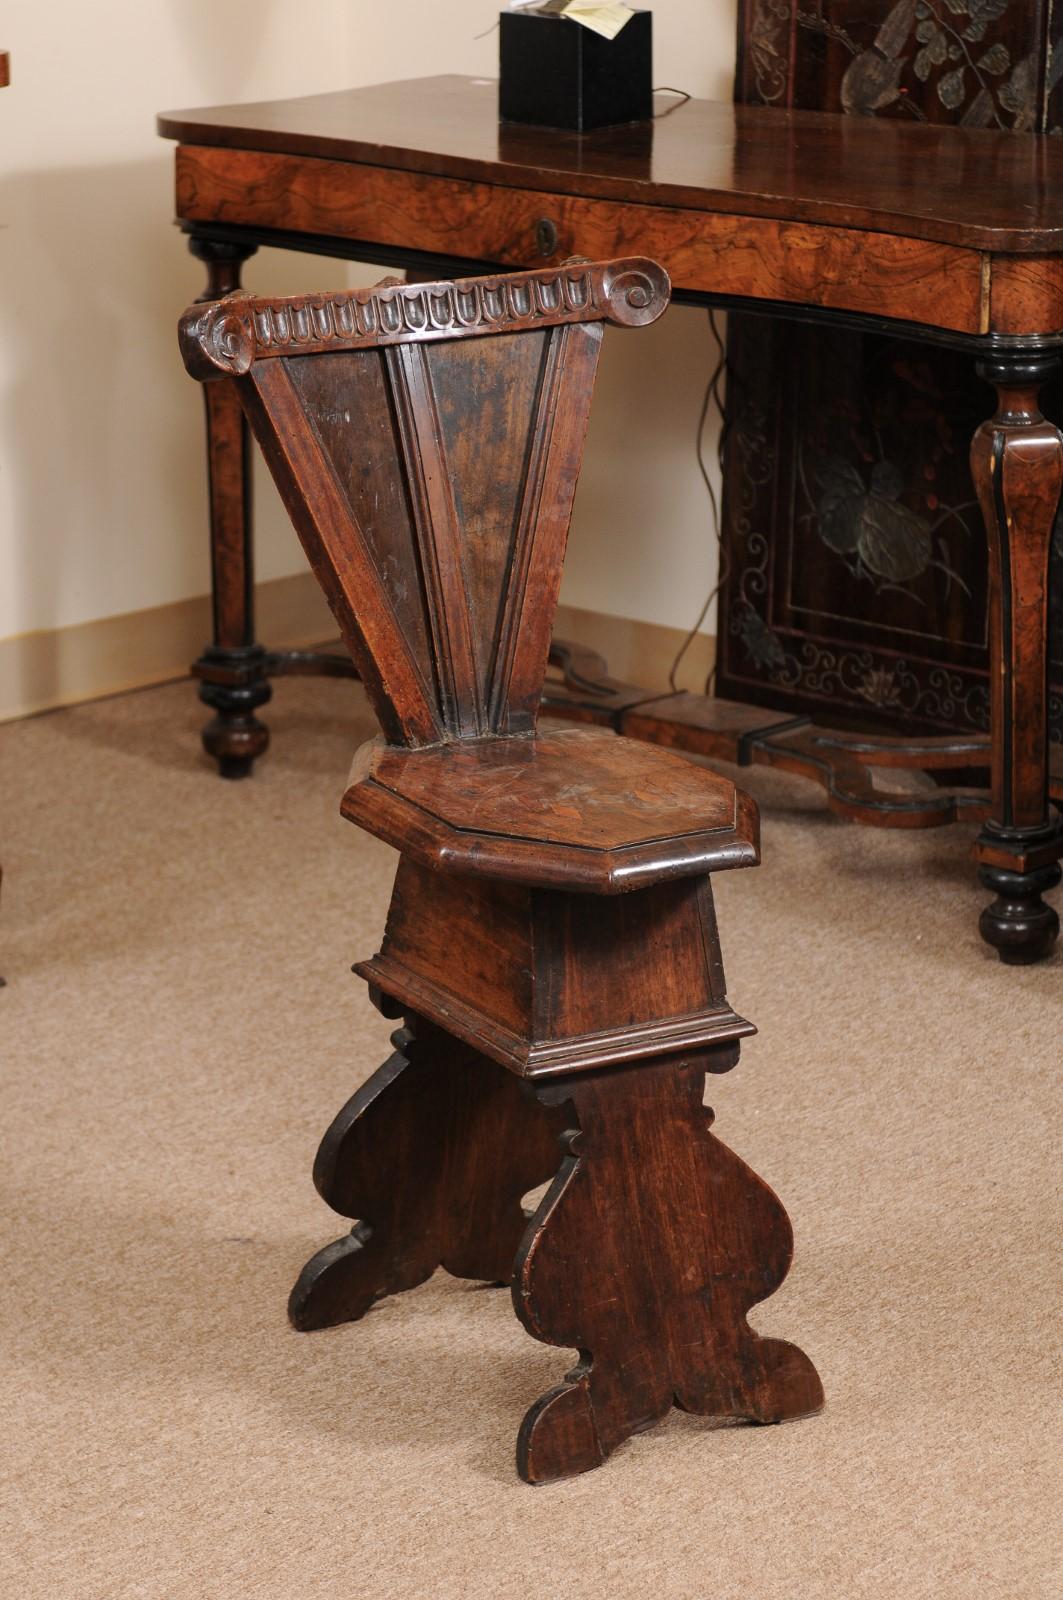 The Italian Baroque hall chair in walnut with carved triangular back with scroll detail and octagonal formed seat.